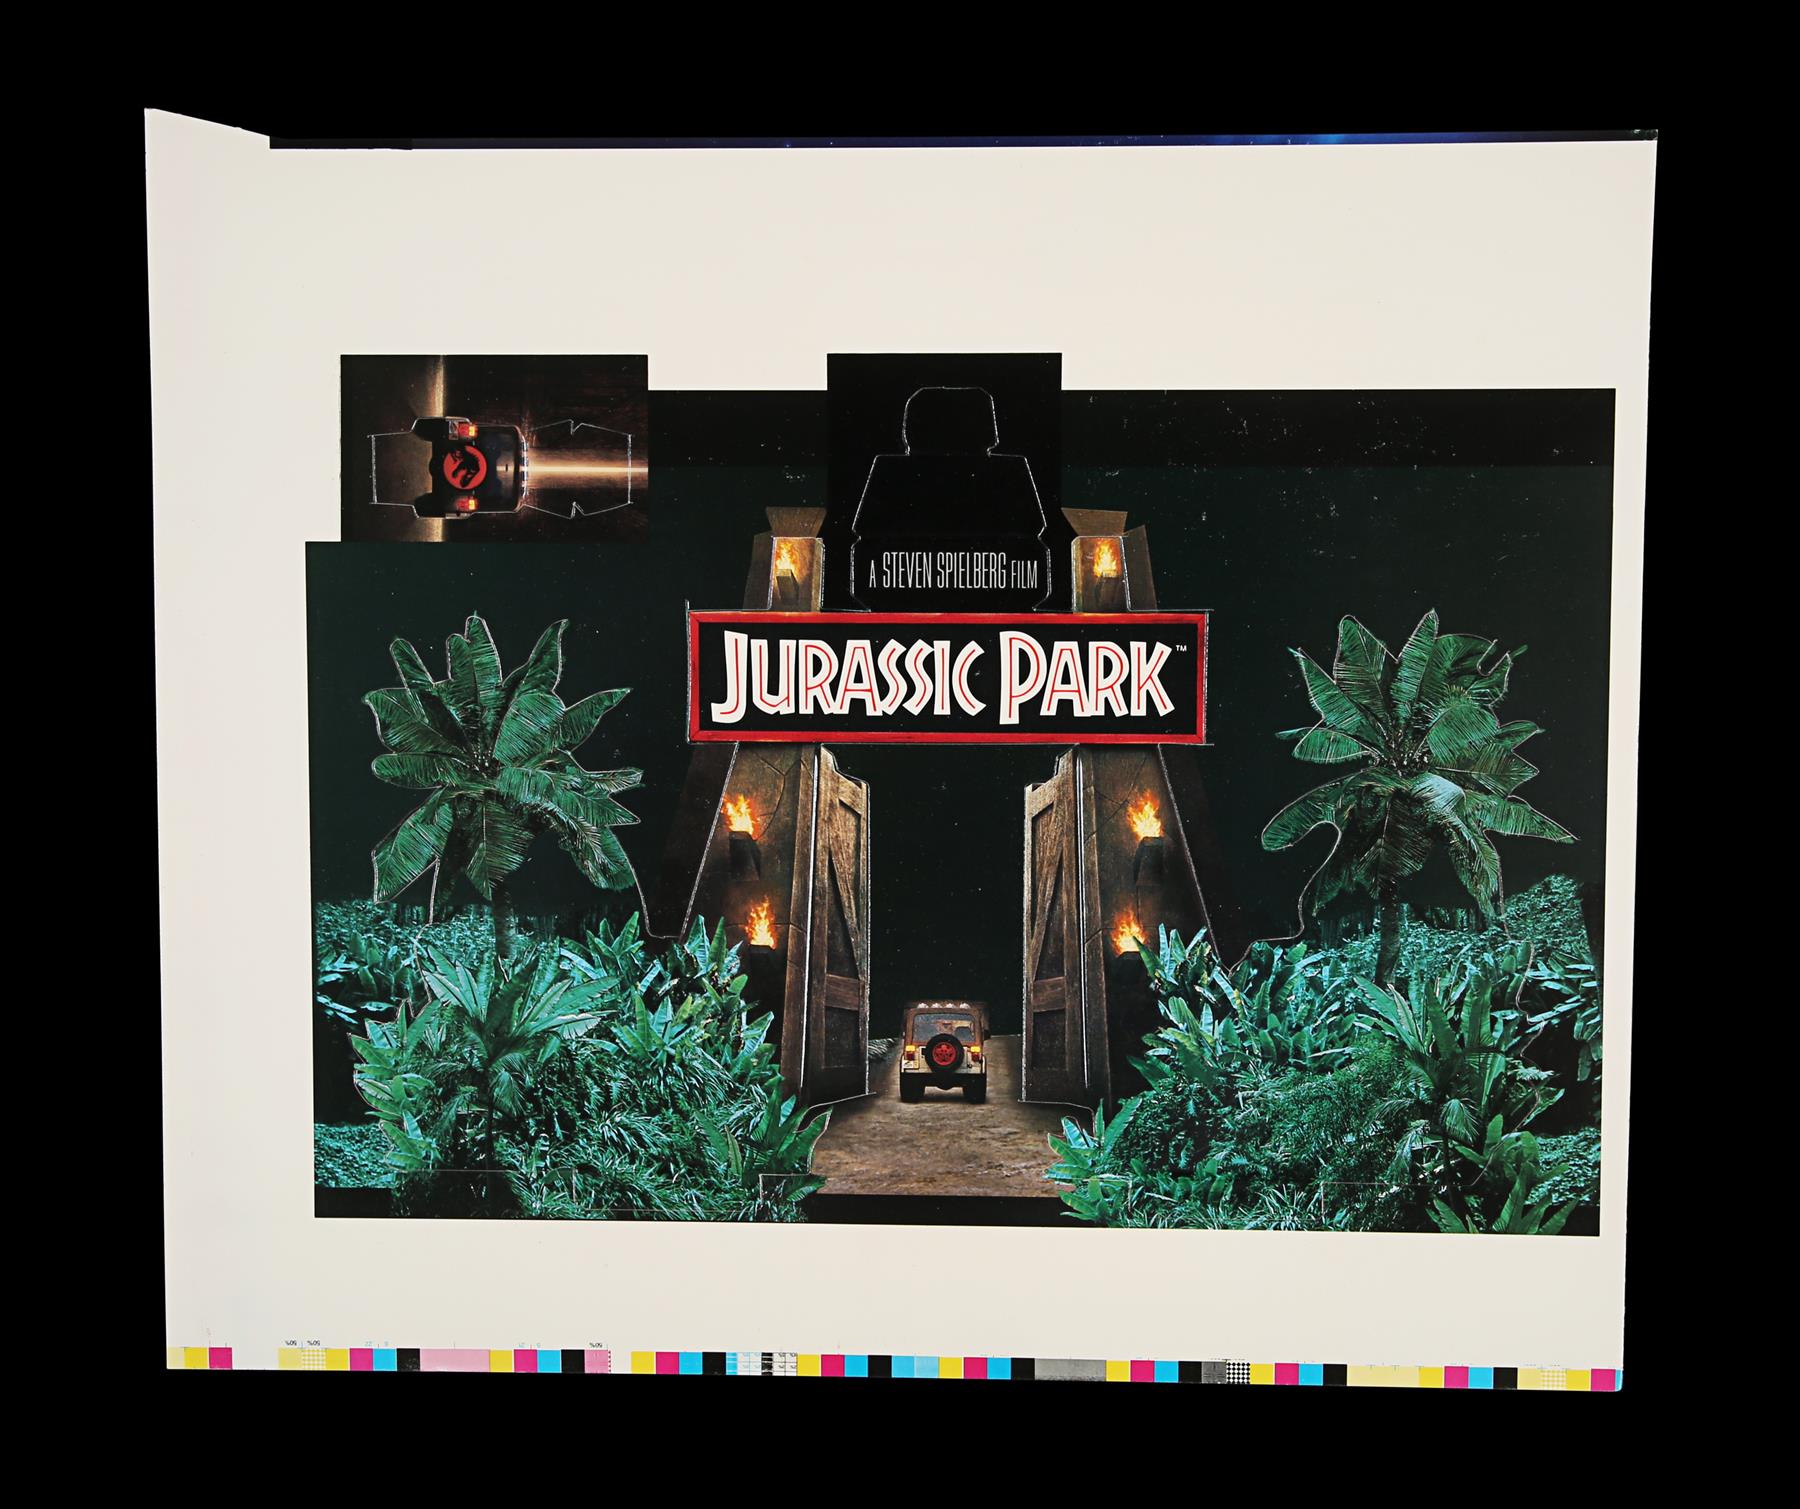 JURASSIC PARK (1993) - Promotional and In-Store Merchandise, 1993 - Image 6 of 8